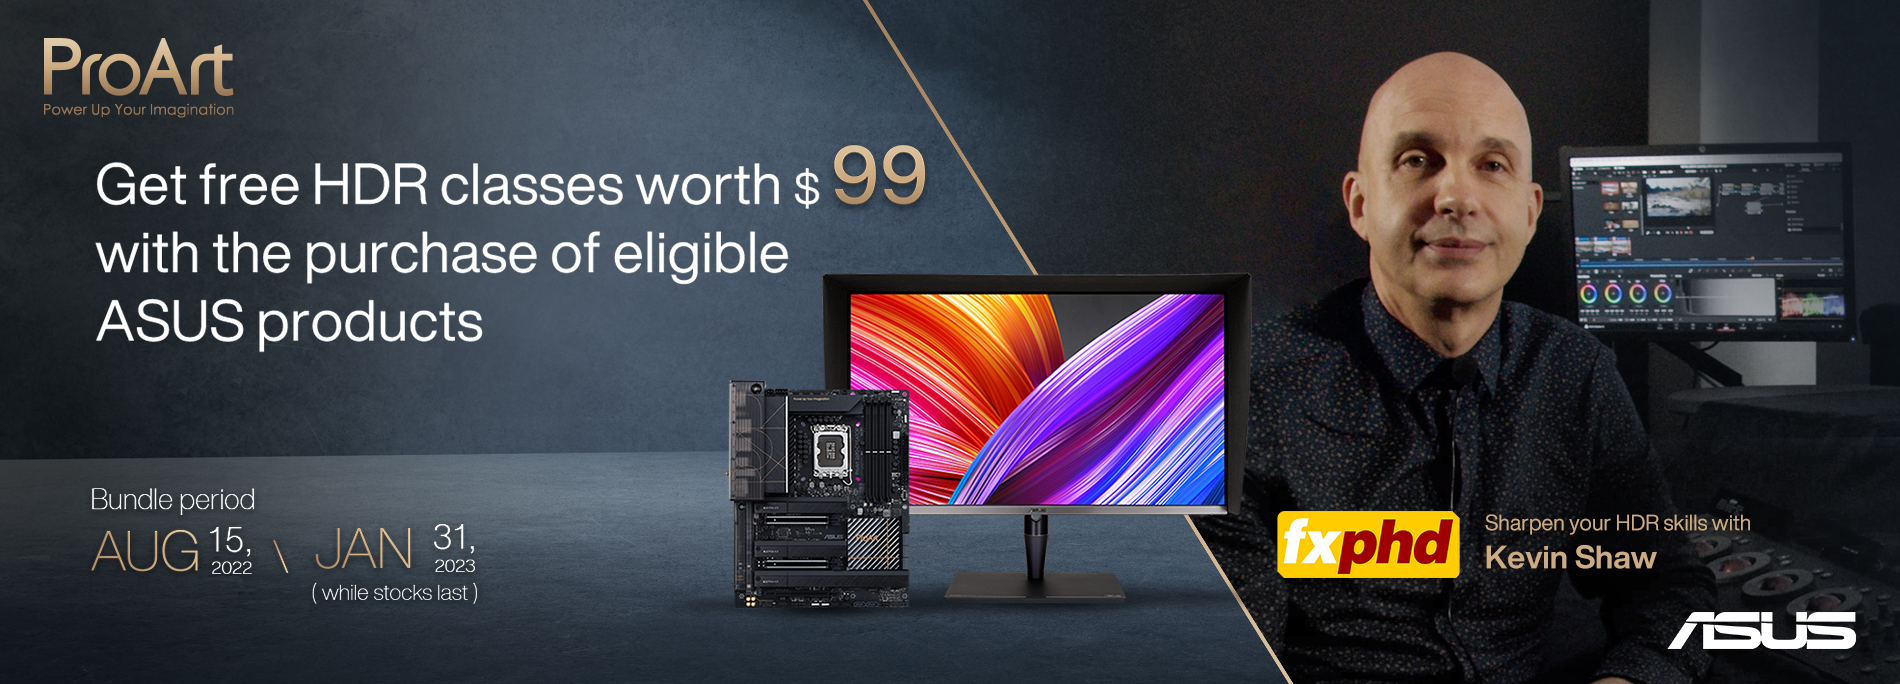 ASUS x fxphd - Get free HDR classes with the purchases of eligible products